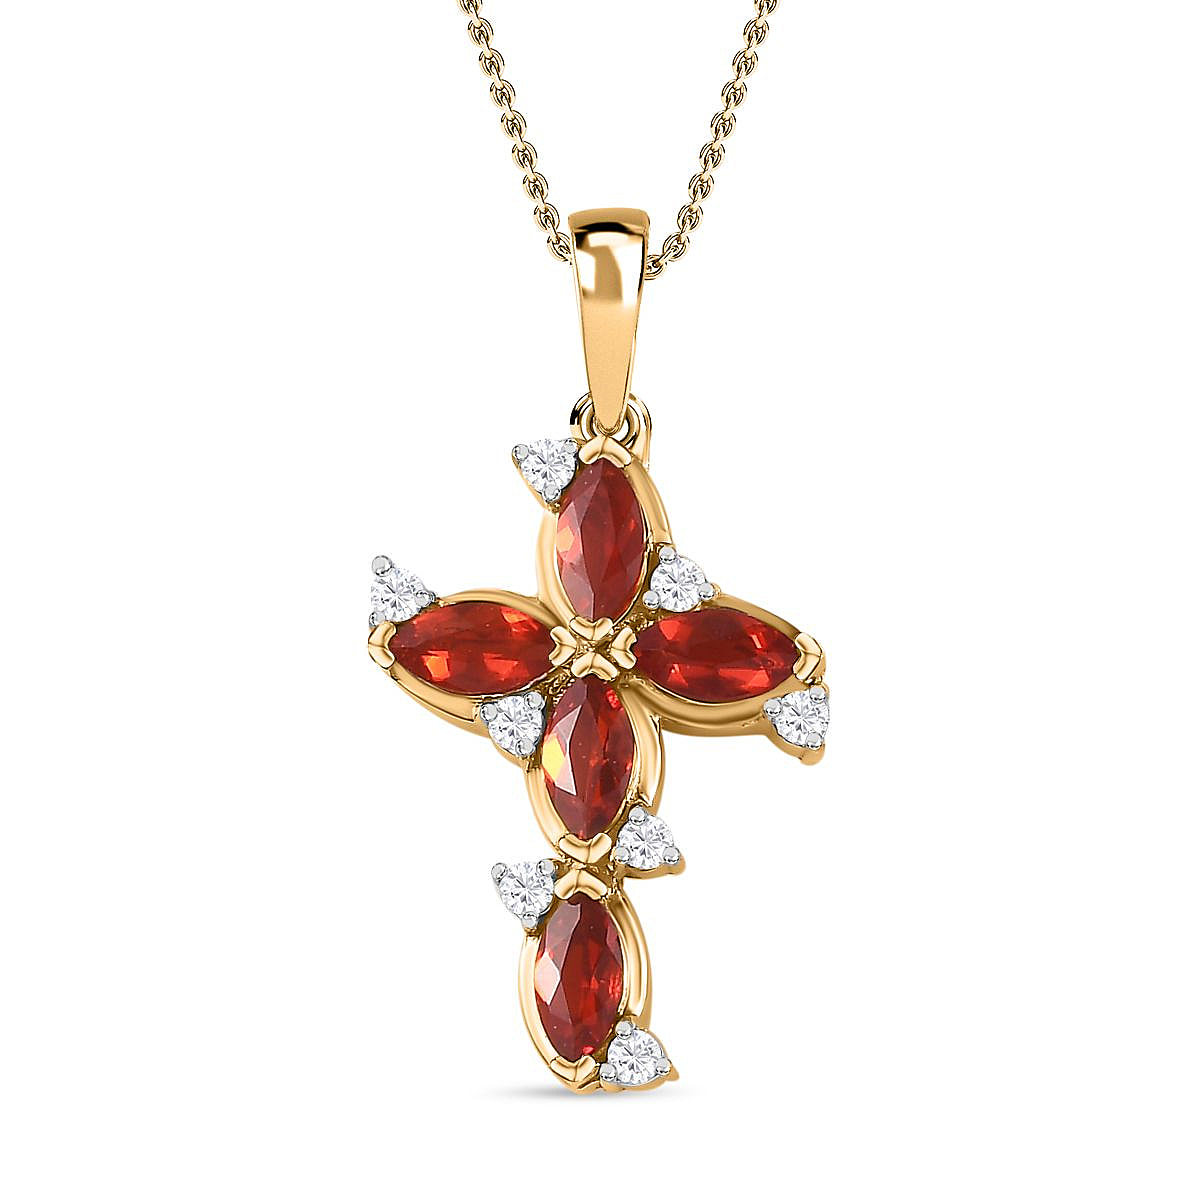 Salamanca Fire Opal & Natural Zircon The Cross Pendant with Chain (Size 20) in 18K Yellow Gold Vermeil Plated Sterling Silver 1.00 Ct.